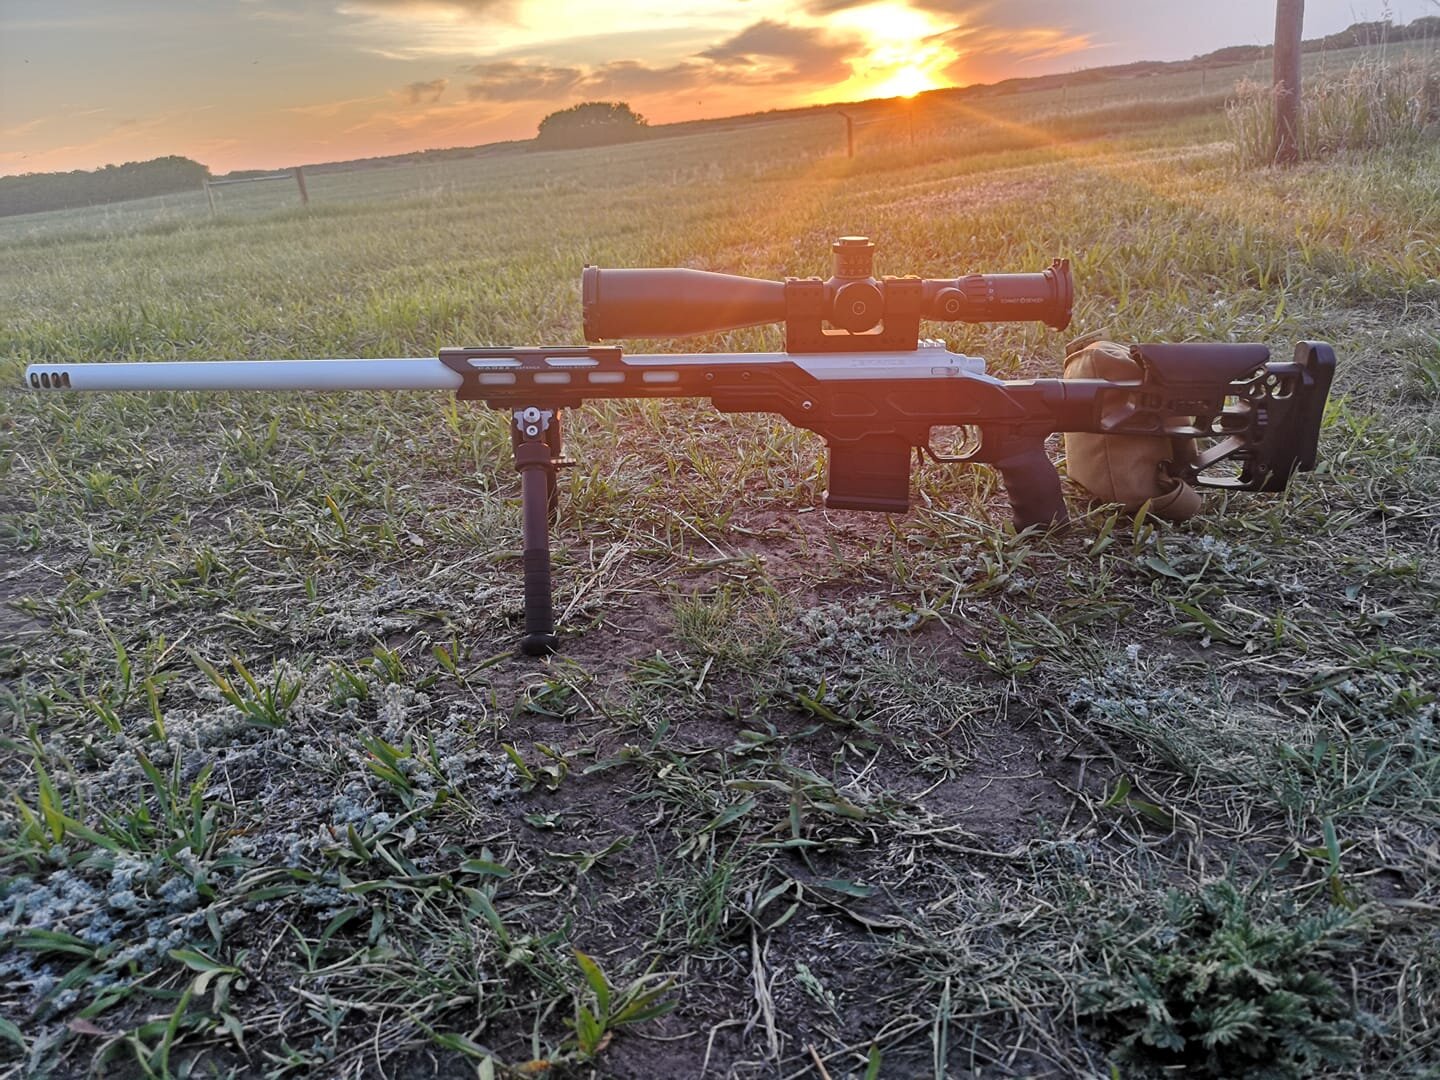 New Precision Rifle? Now The Work Begins – Introduction